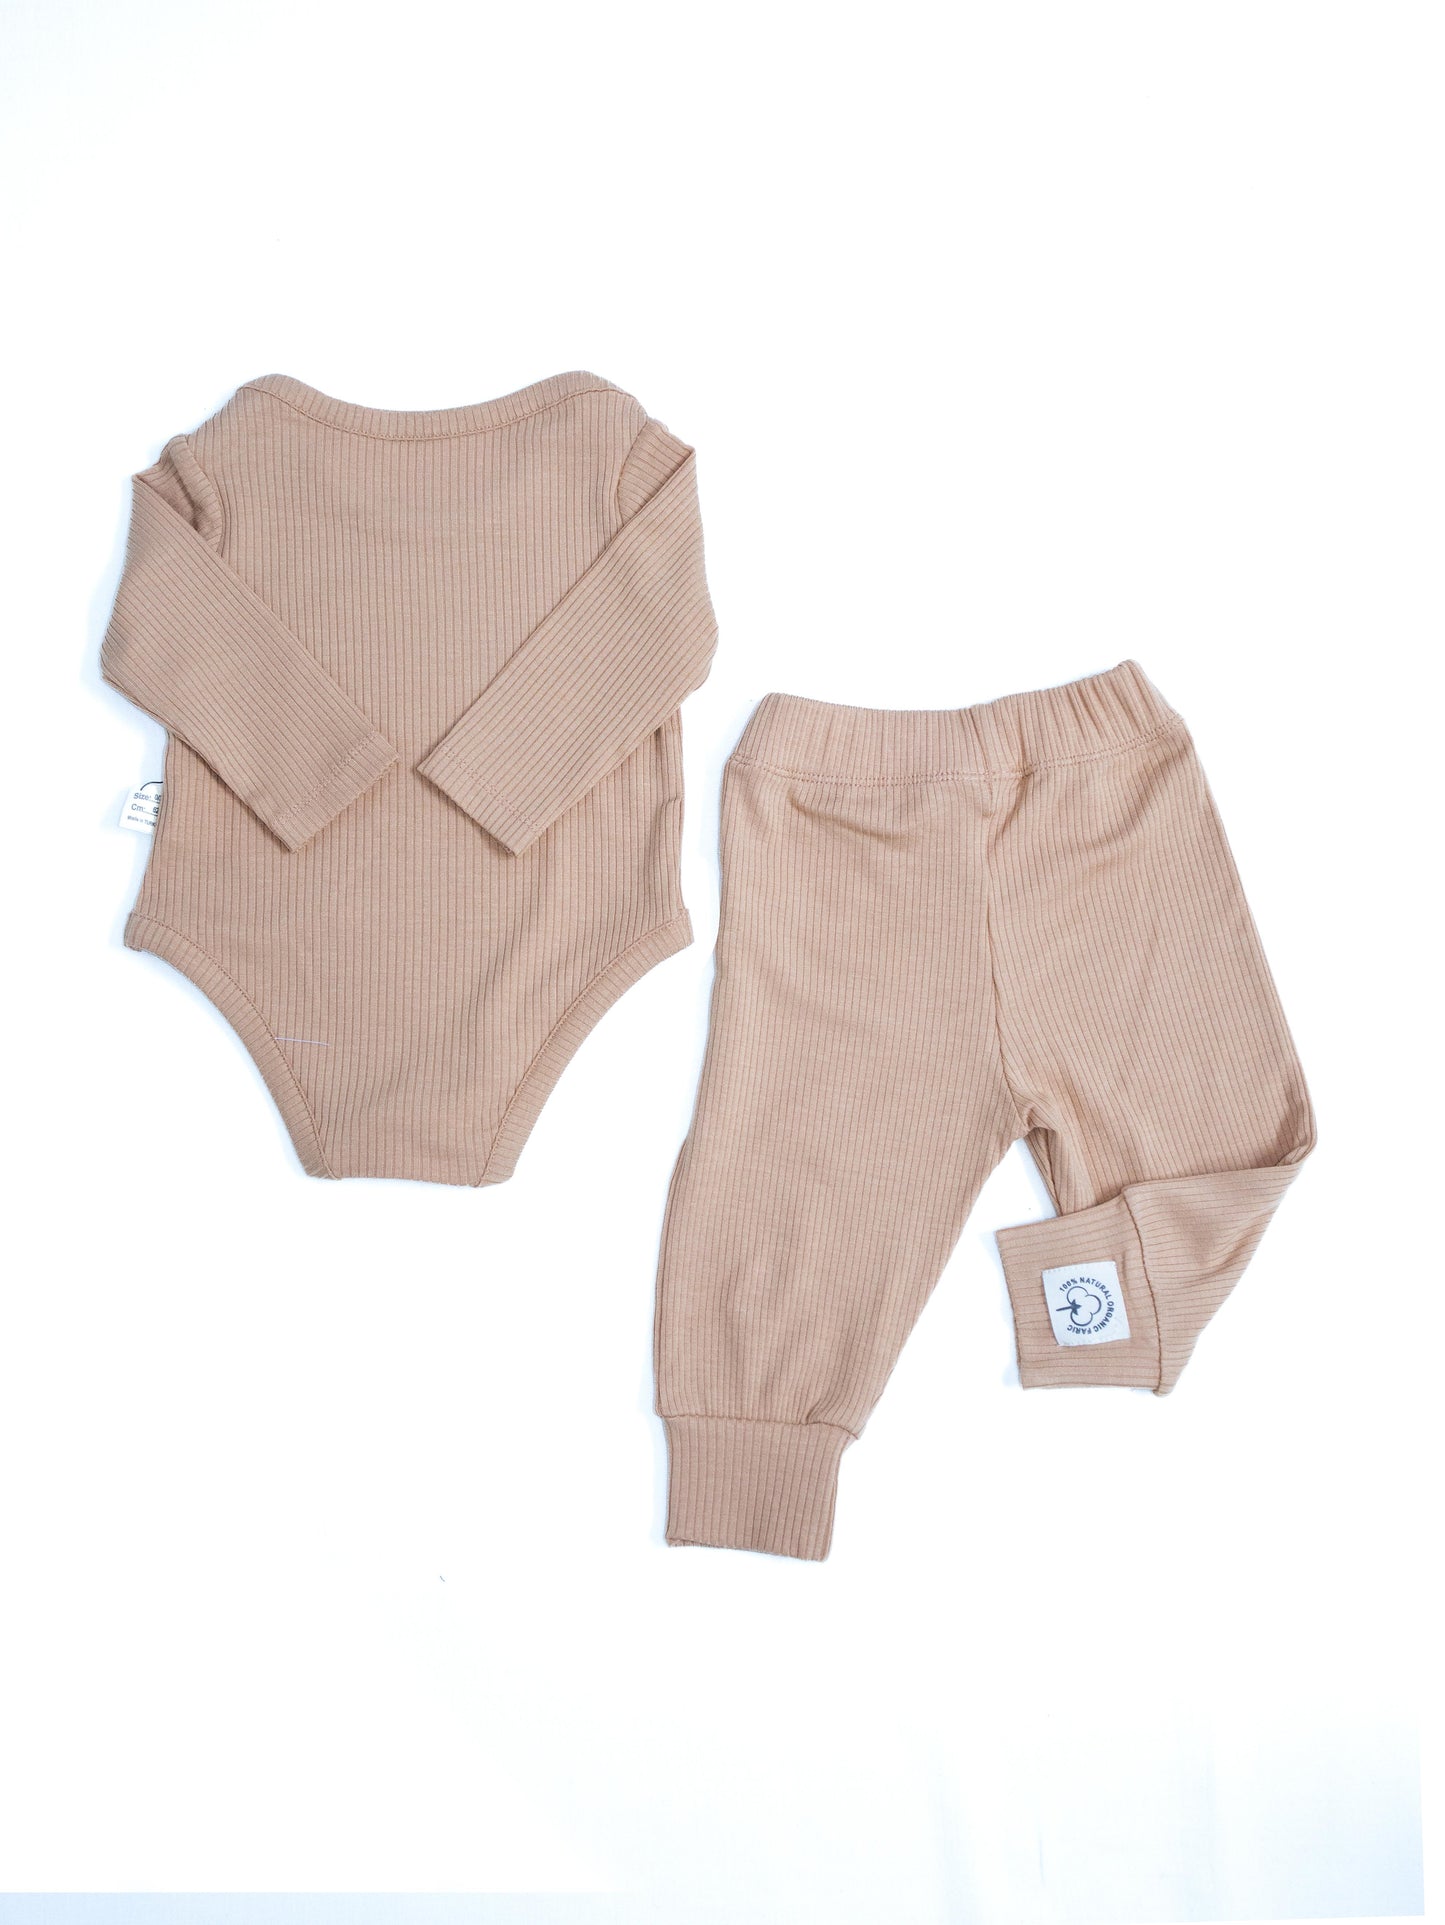 Baby Bodysuit Set Made of 100% Lyocell Cotton Fabric